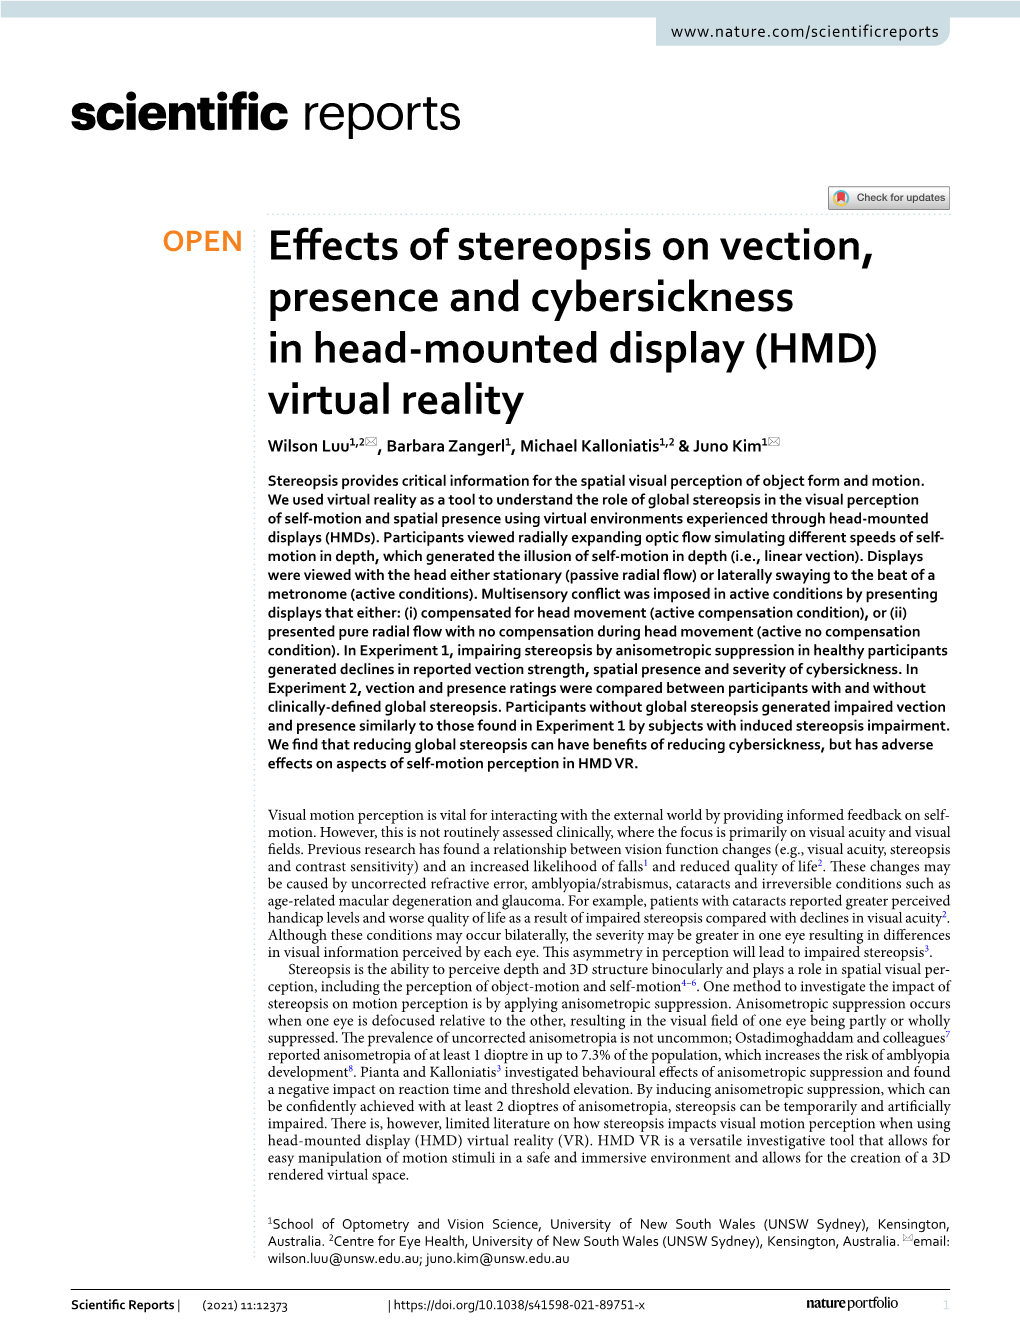 Effects of Stereopsis on Vection, Presence and Cybersickness in Head-Mounted Display (HMD) Virtual Reality